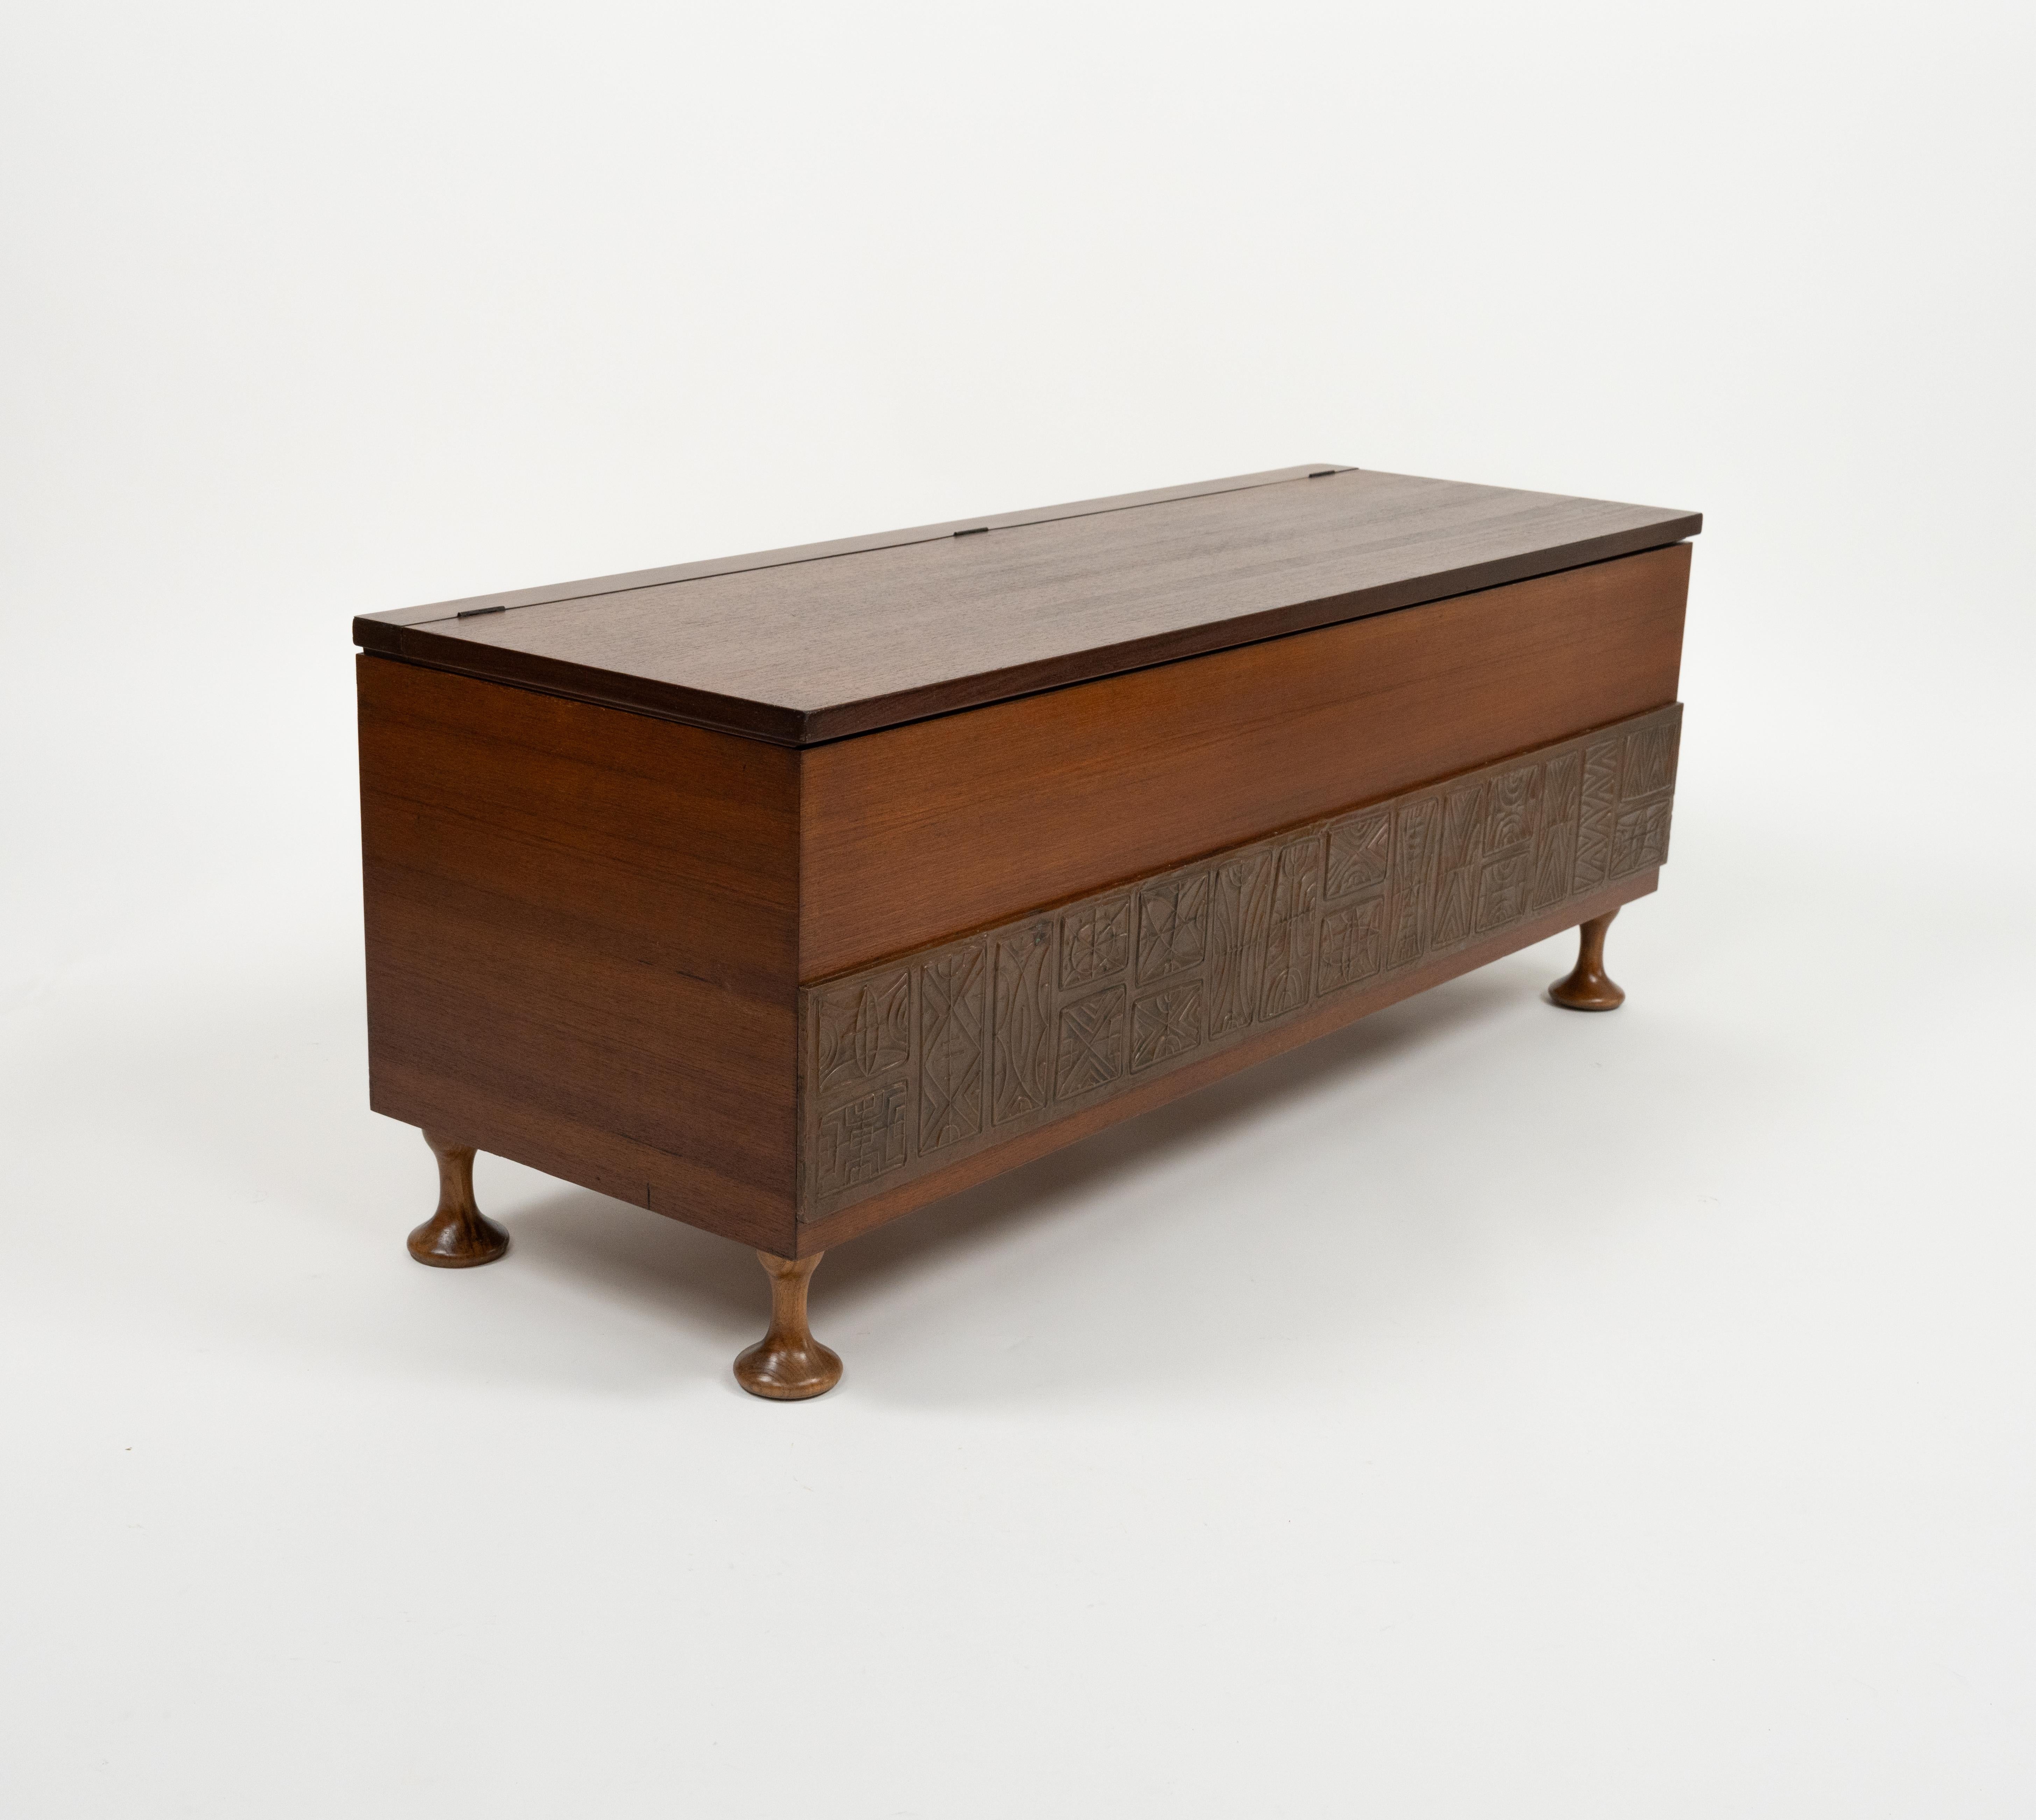 Metal Midcentury Chest in Wood and Copper by Santambrogio & De Berti, Italy 1960s For Sale